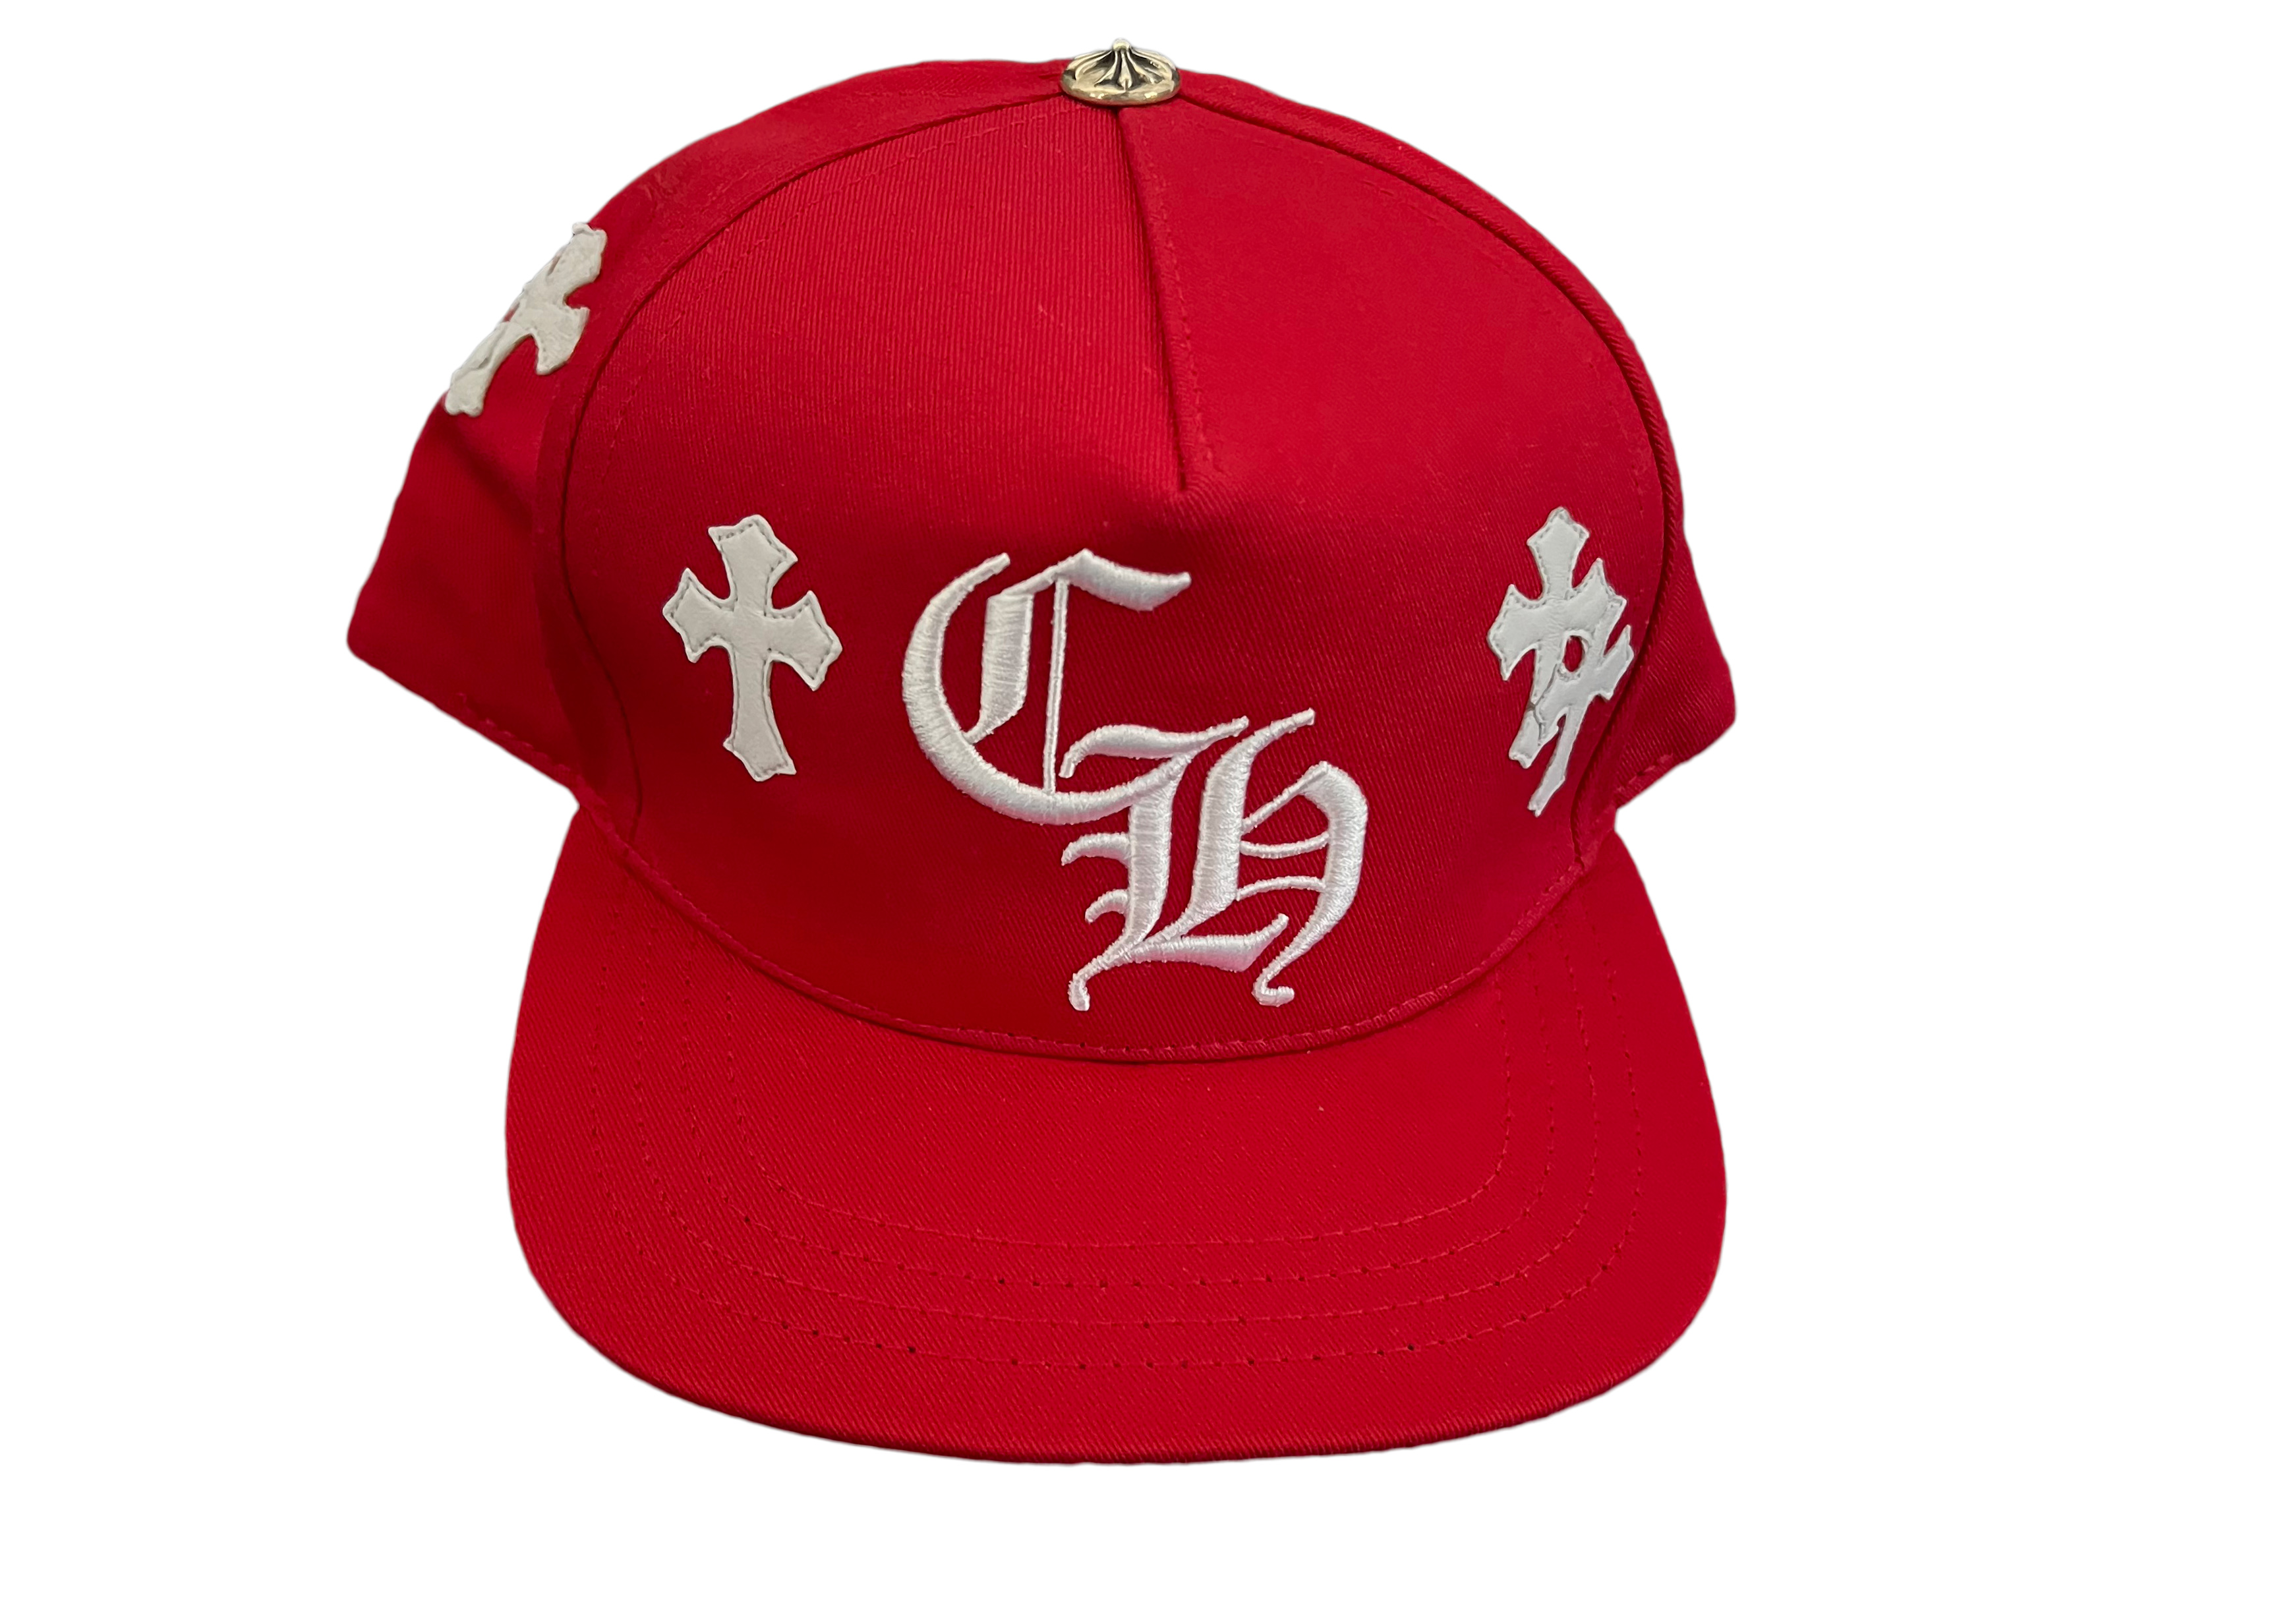 Chrome Hearts Cross Patch Baseball Hat Red - US